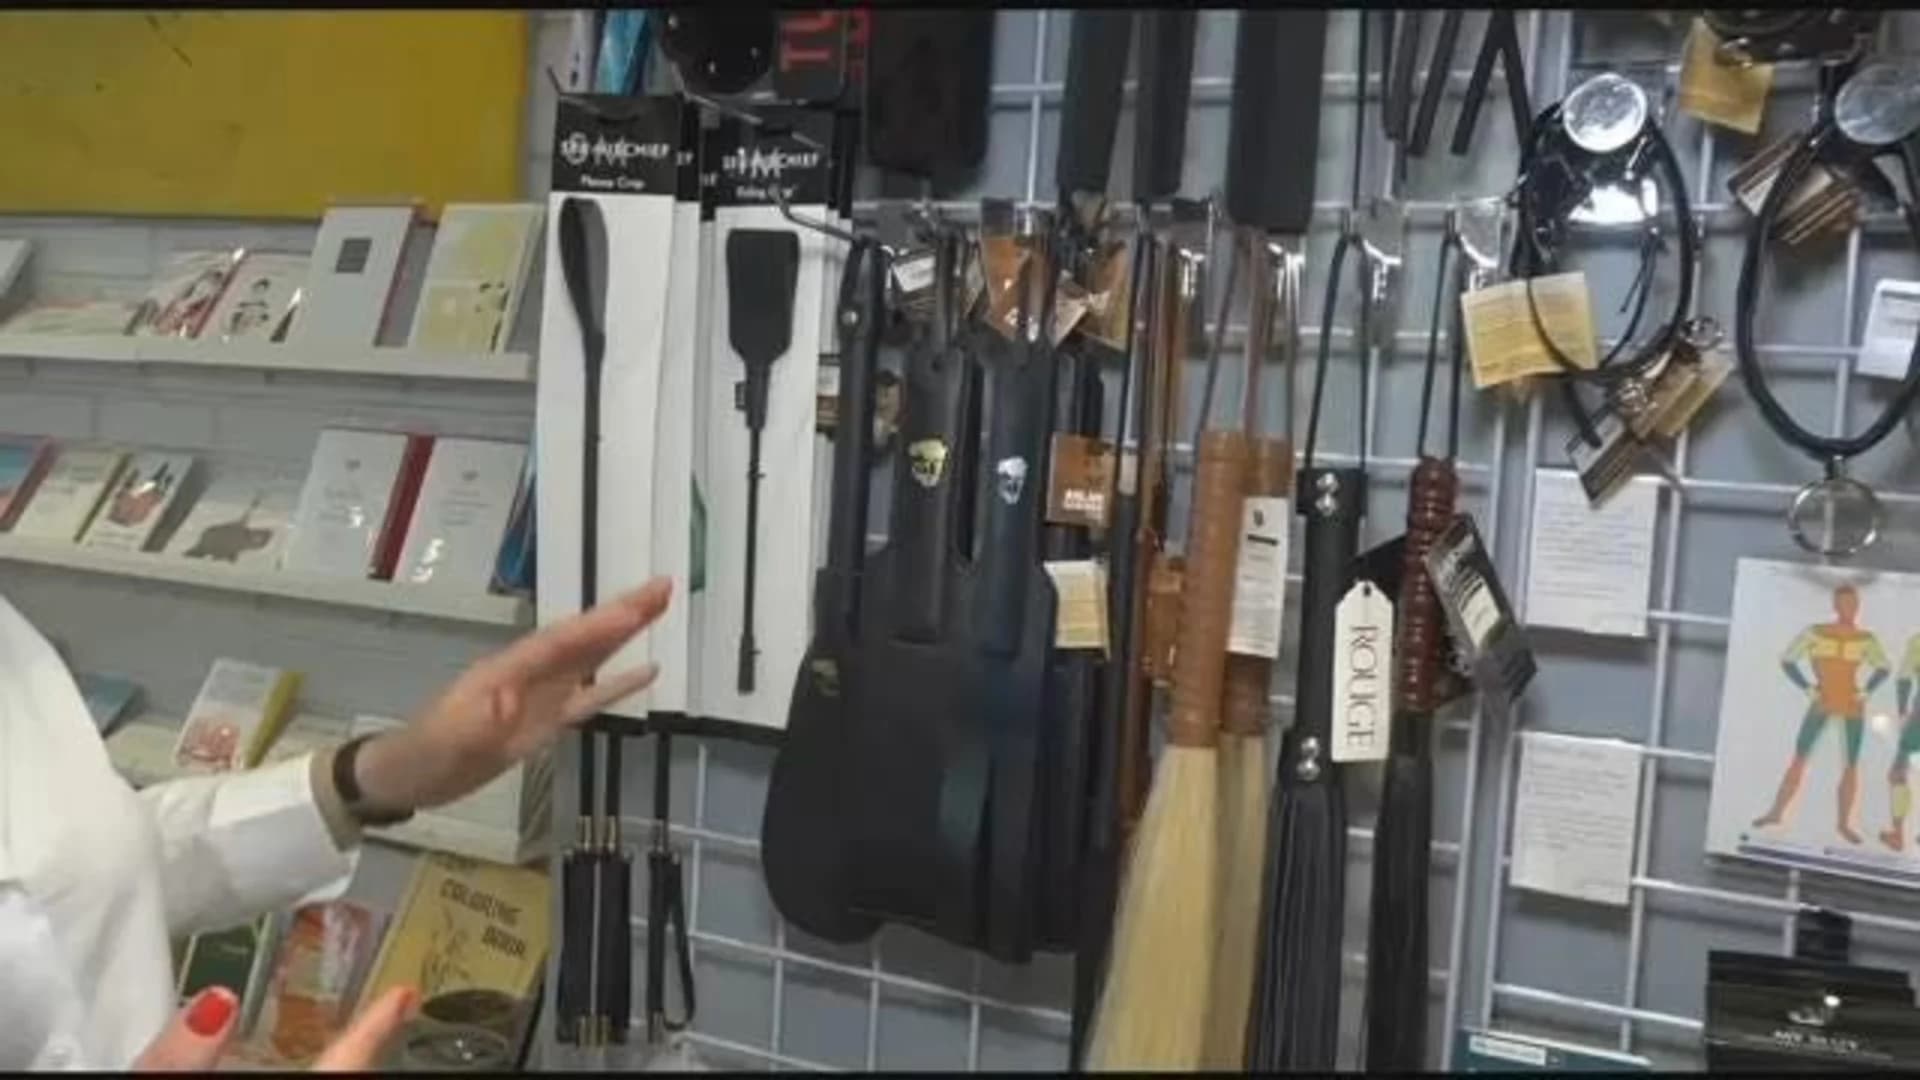 Park Slope adult shop seeks to inform and educate